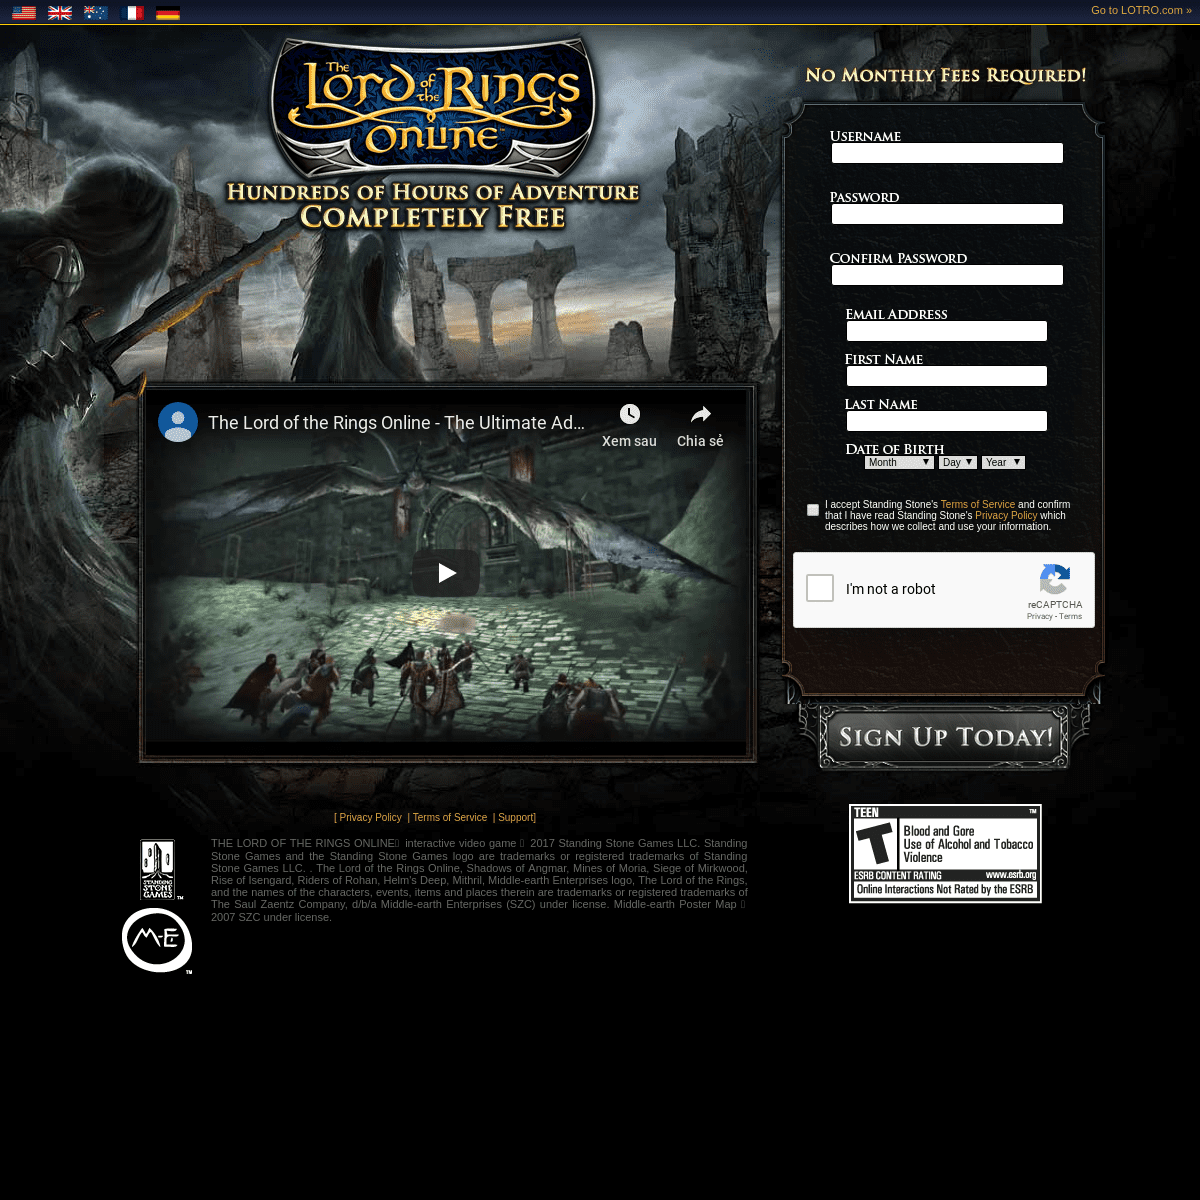 Play The Lord of the Rings Online™ Free!